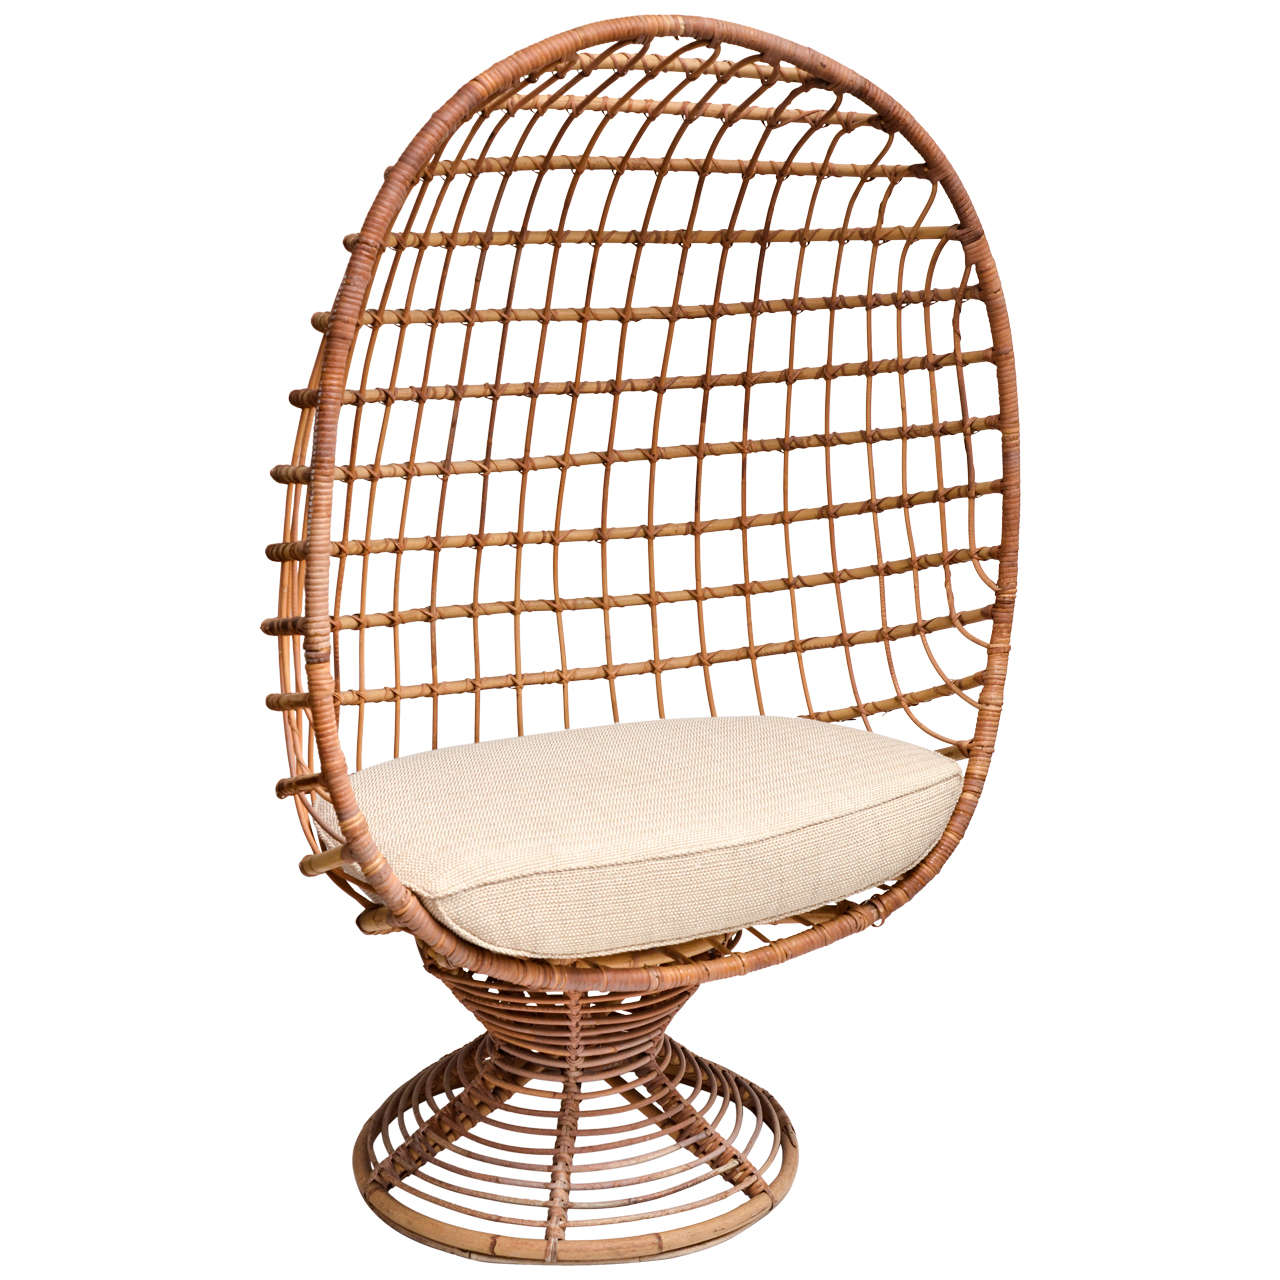 Enclosed Bamboo Canopy Chair with Upholstered Seat Cushion For Sale